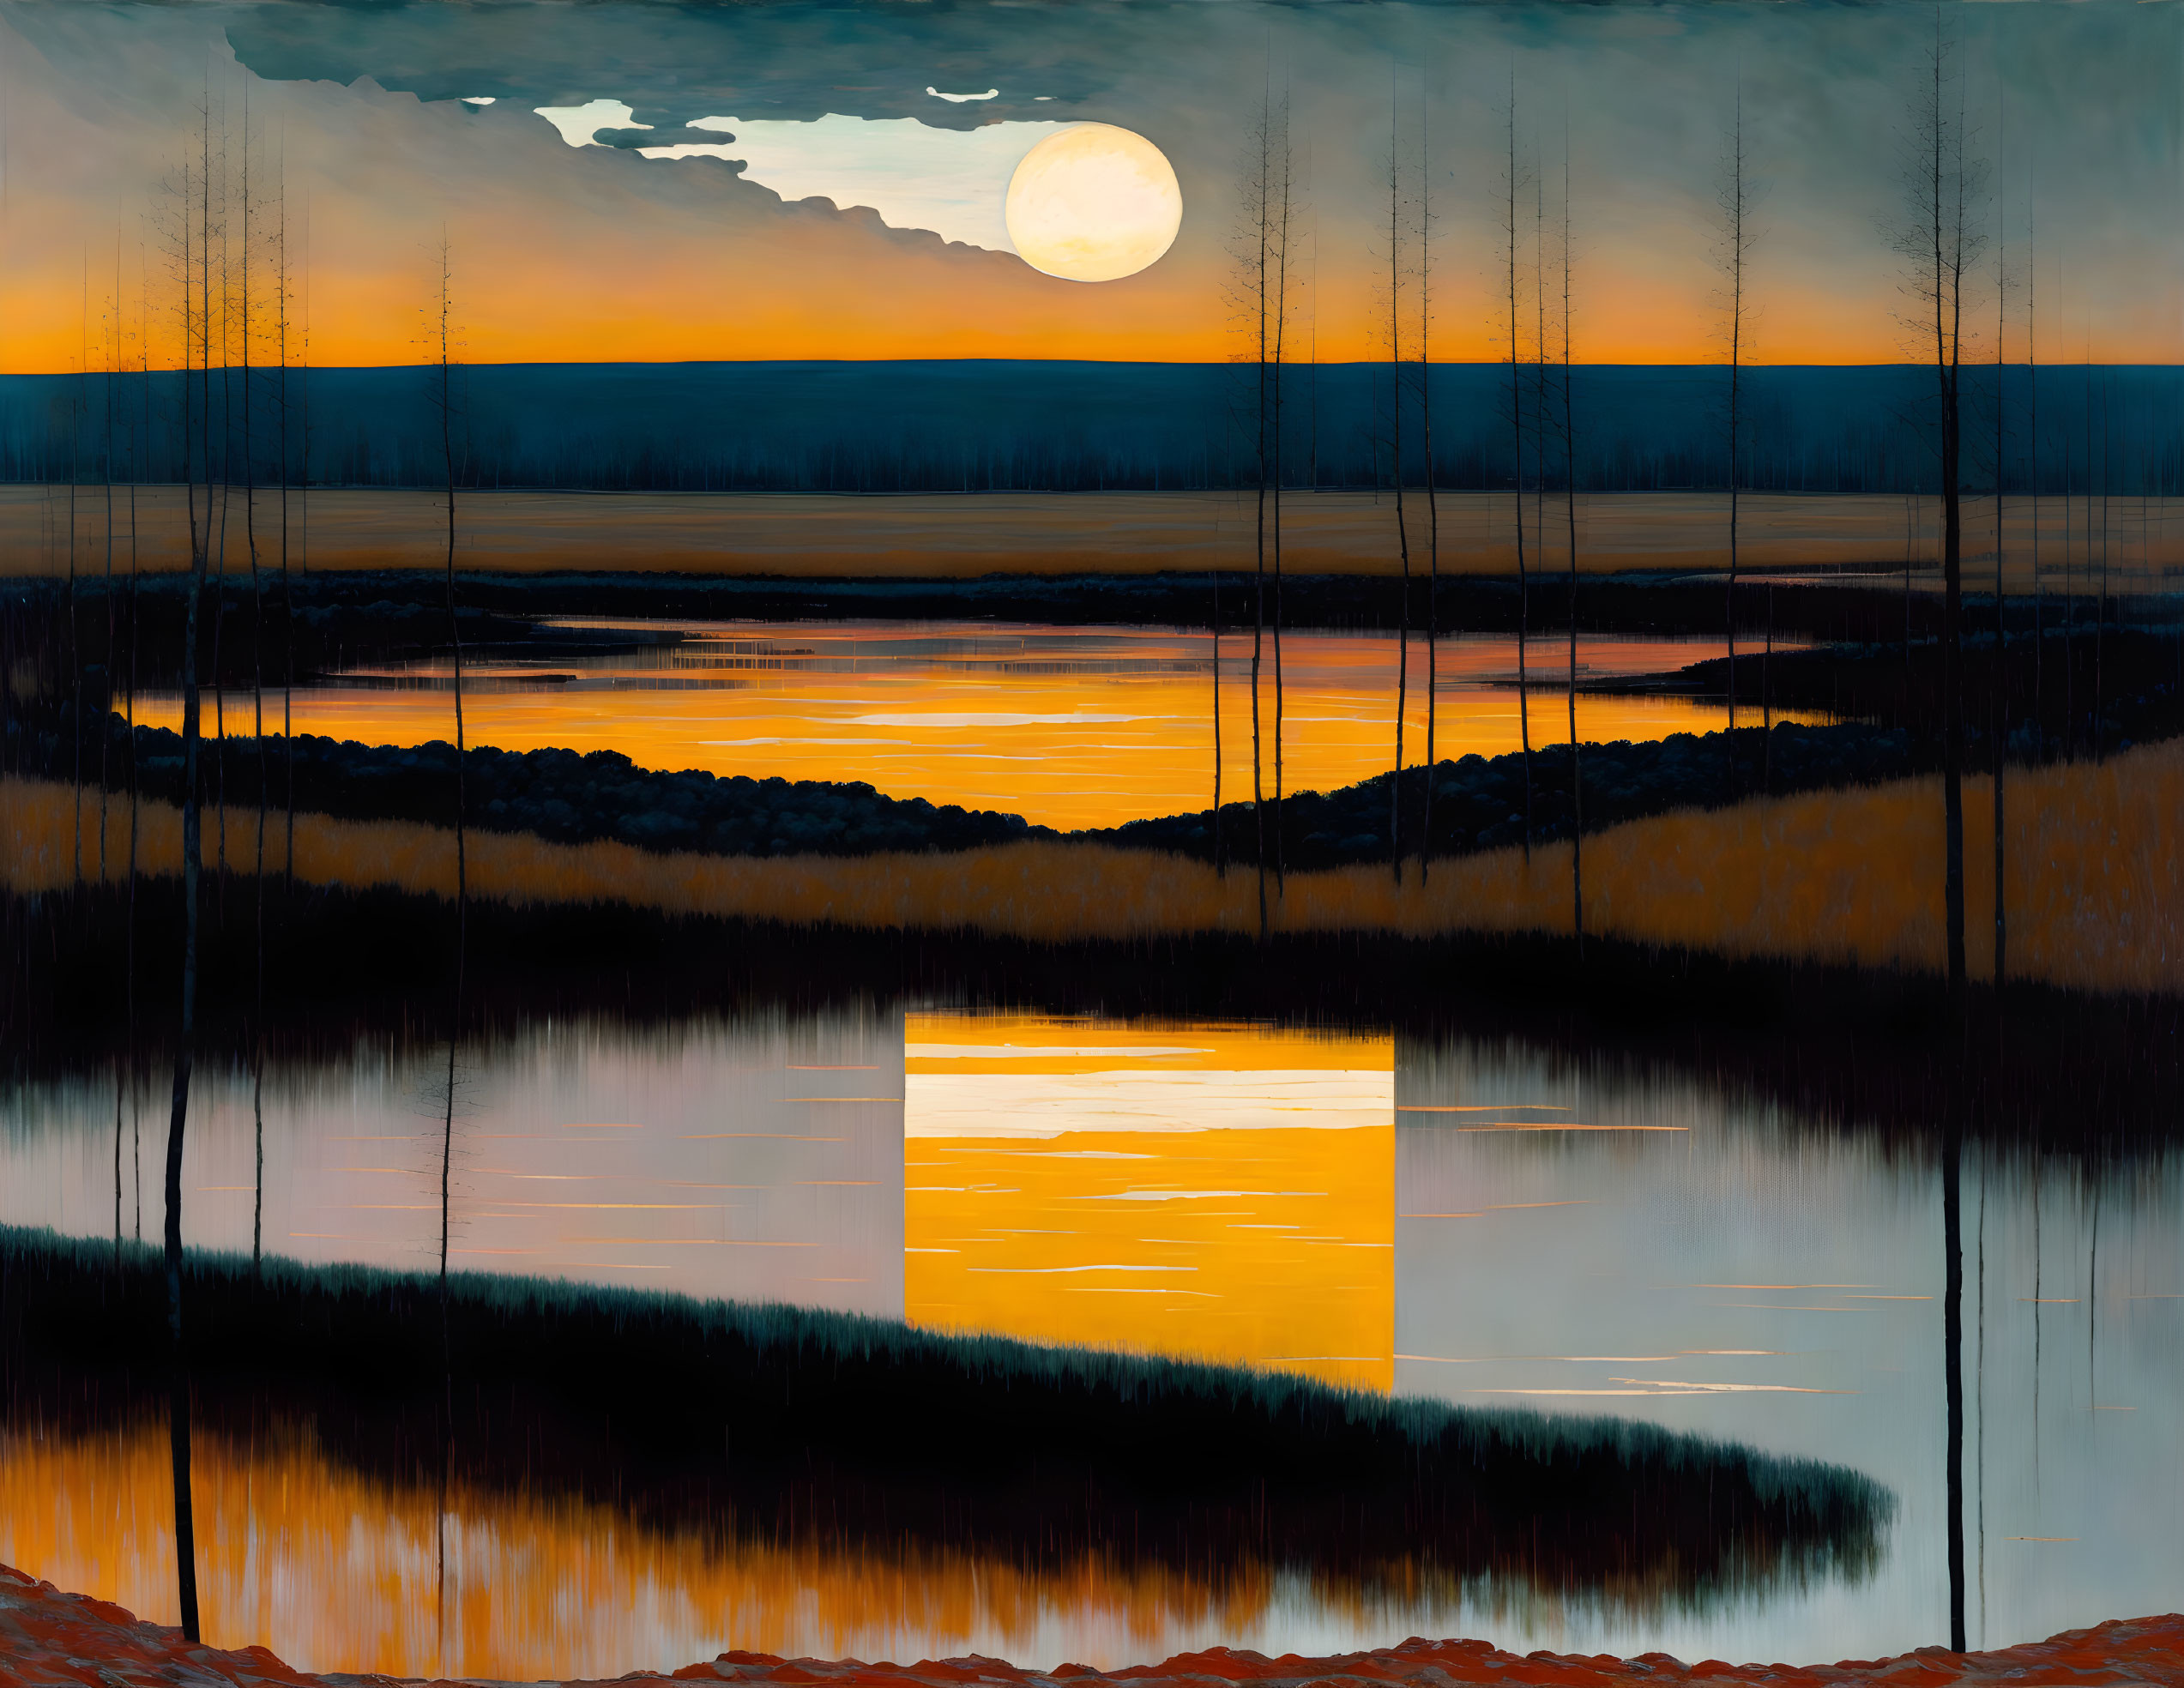 Tranquil landscape painting: full moon, calm water, silhouetted trees, vibrant twilight